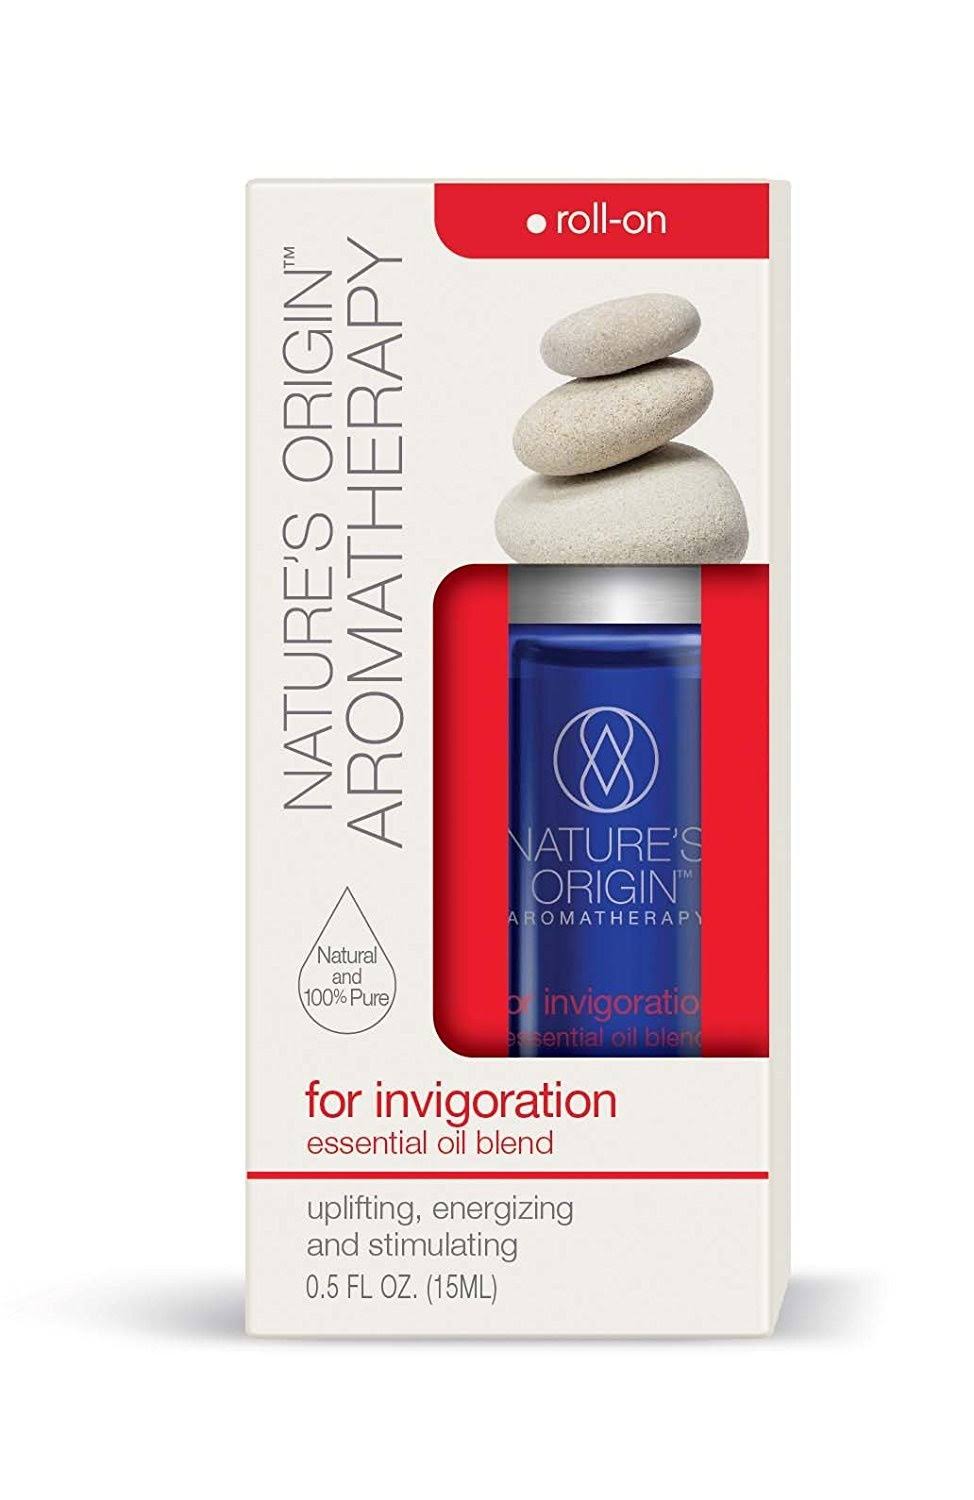 Natures Origin Aromatherapy for Invigoration Essential Oil Blend Roll-On, 15 ml | Fragrance